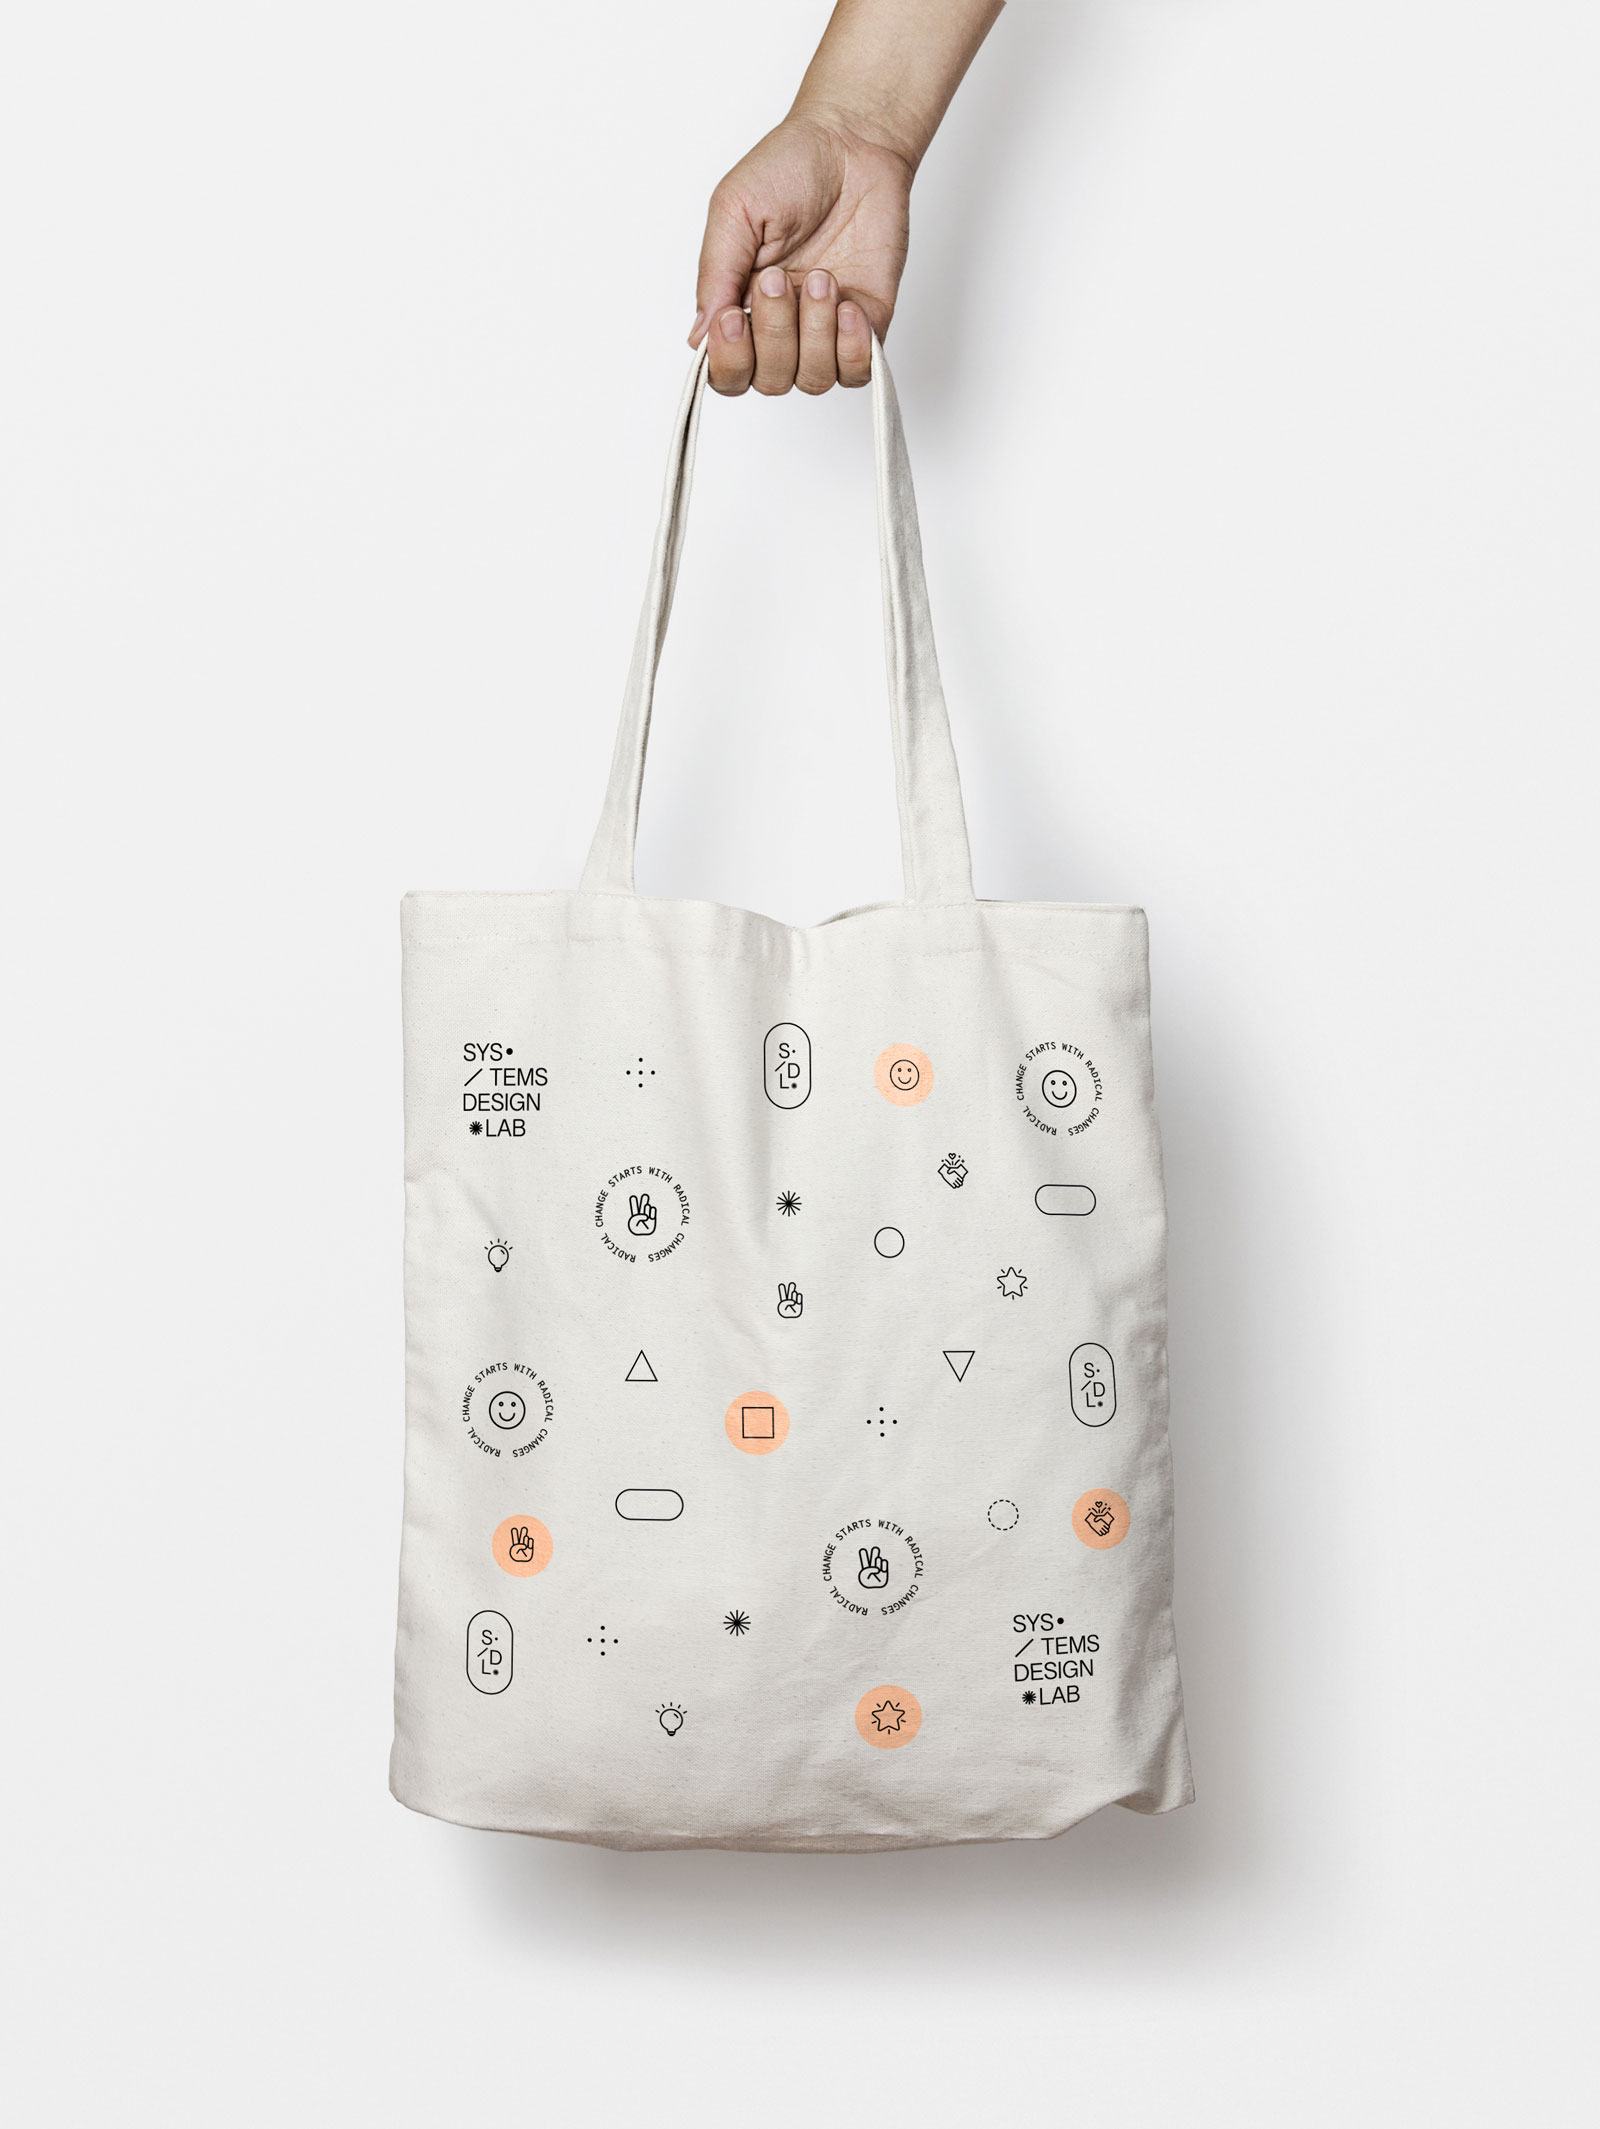 Systems Design Lab tote bag with brand icons